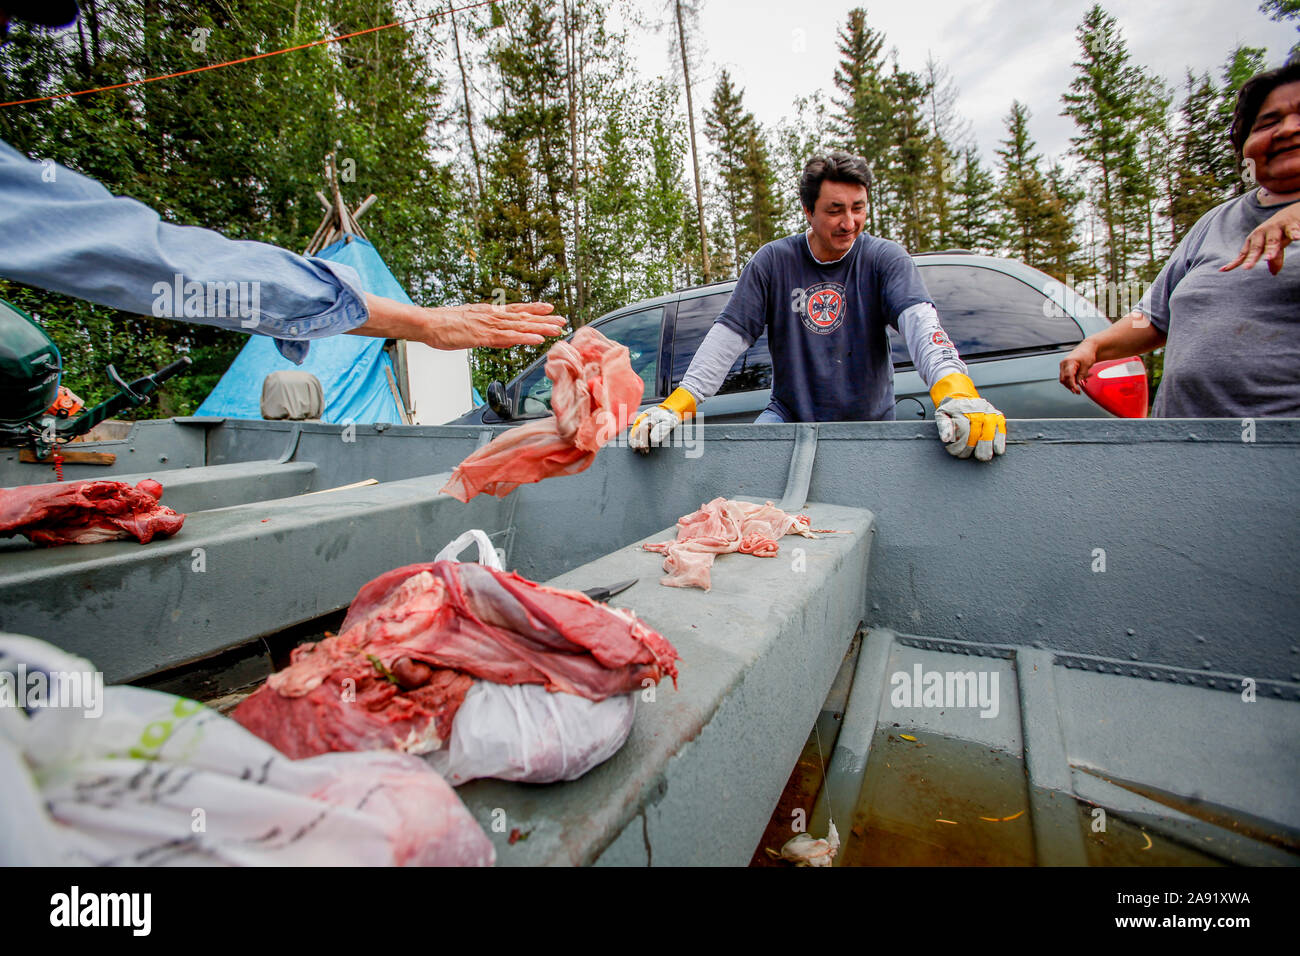 The Chipewyan band of First Nation that lives in Fort McKay are worried about the environmental impact of allowing the oil sand companies to operate in their neighborhood. Dennis LeCorde talks of twoheaded fish in the Athabasca River. His brother Howard LeCorde cuts meat from a freshly killed moose. Stock Photo